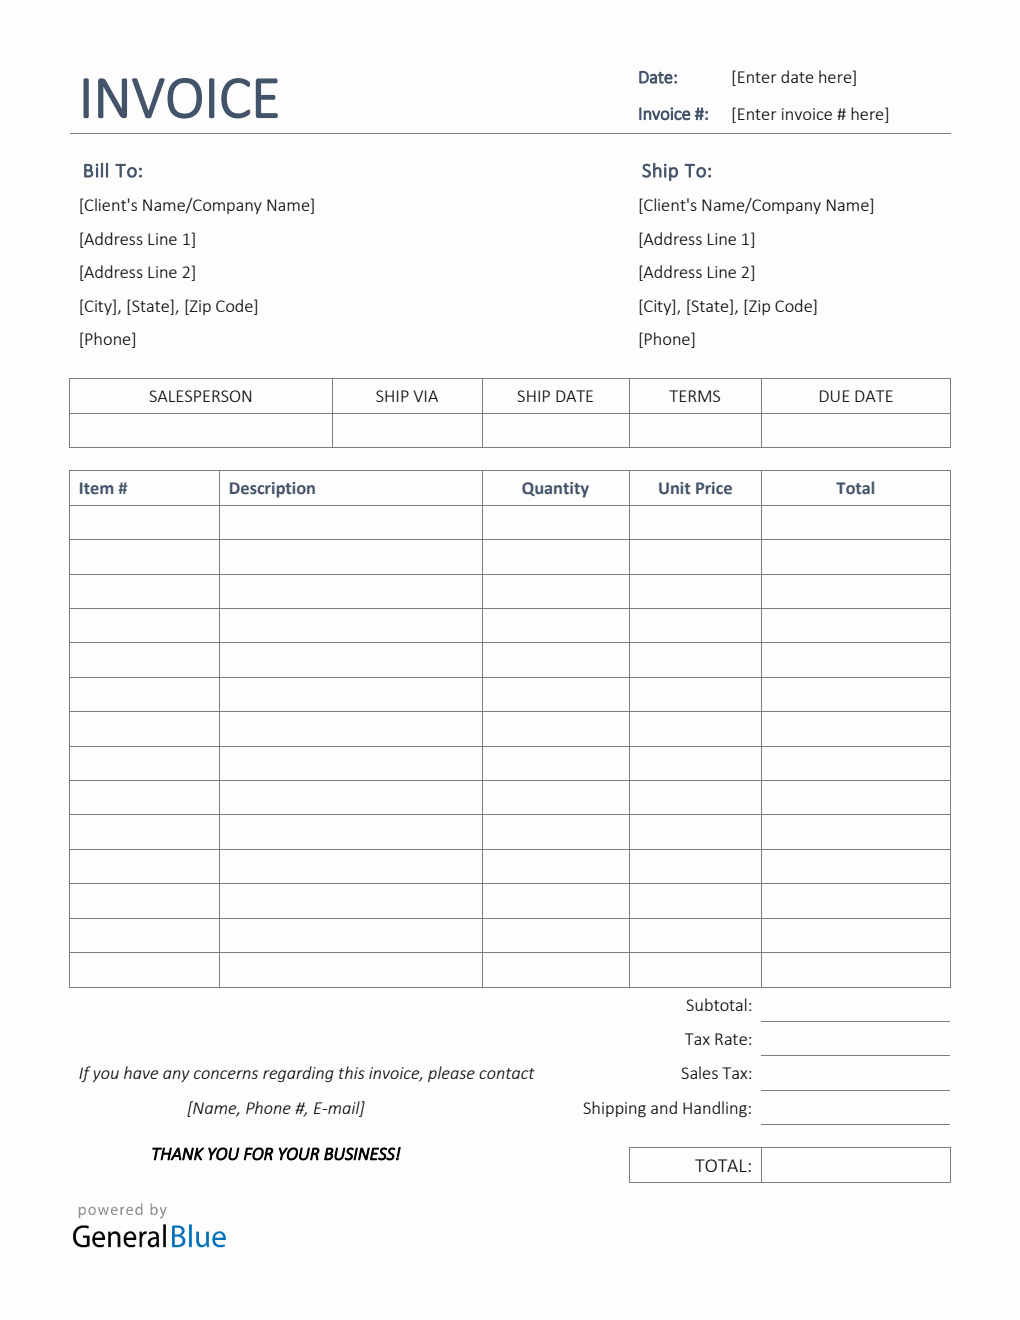 Sales Invoice Template in Word (Simple)